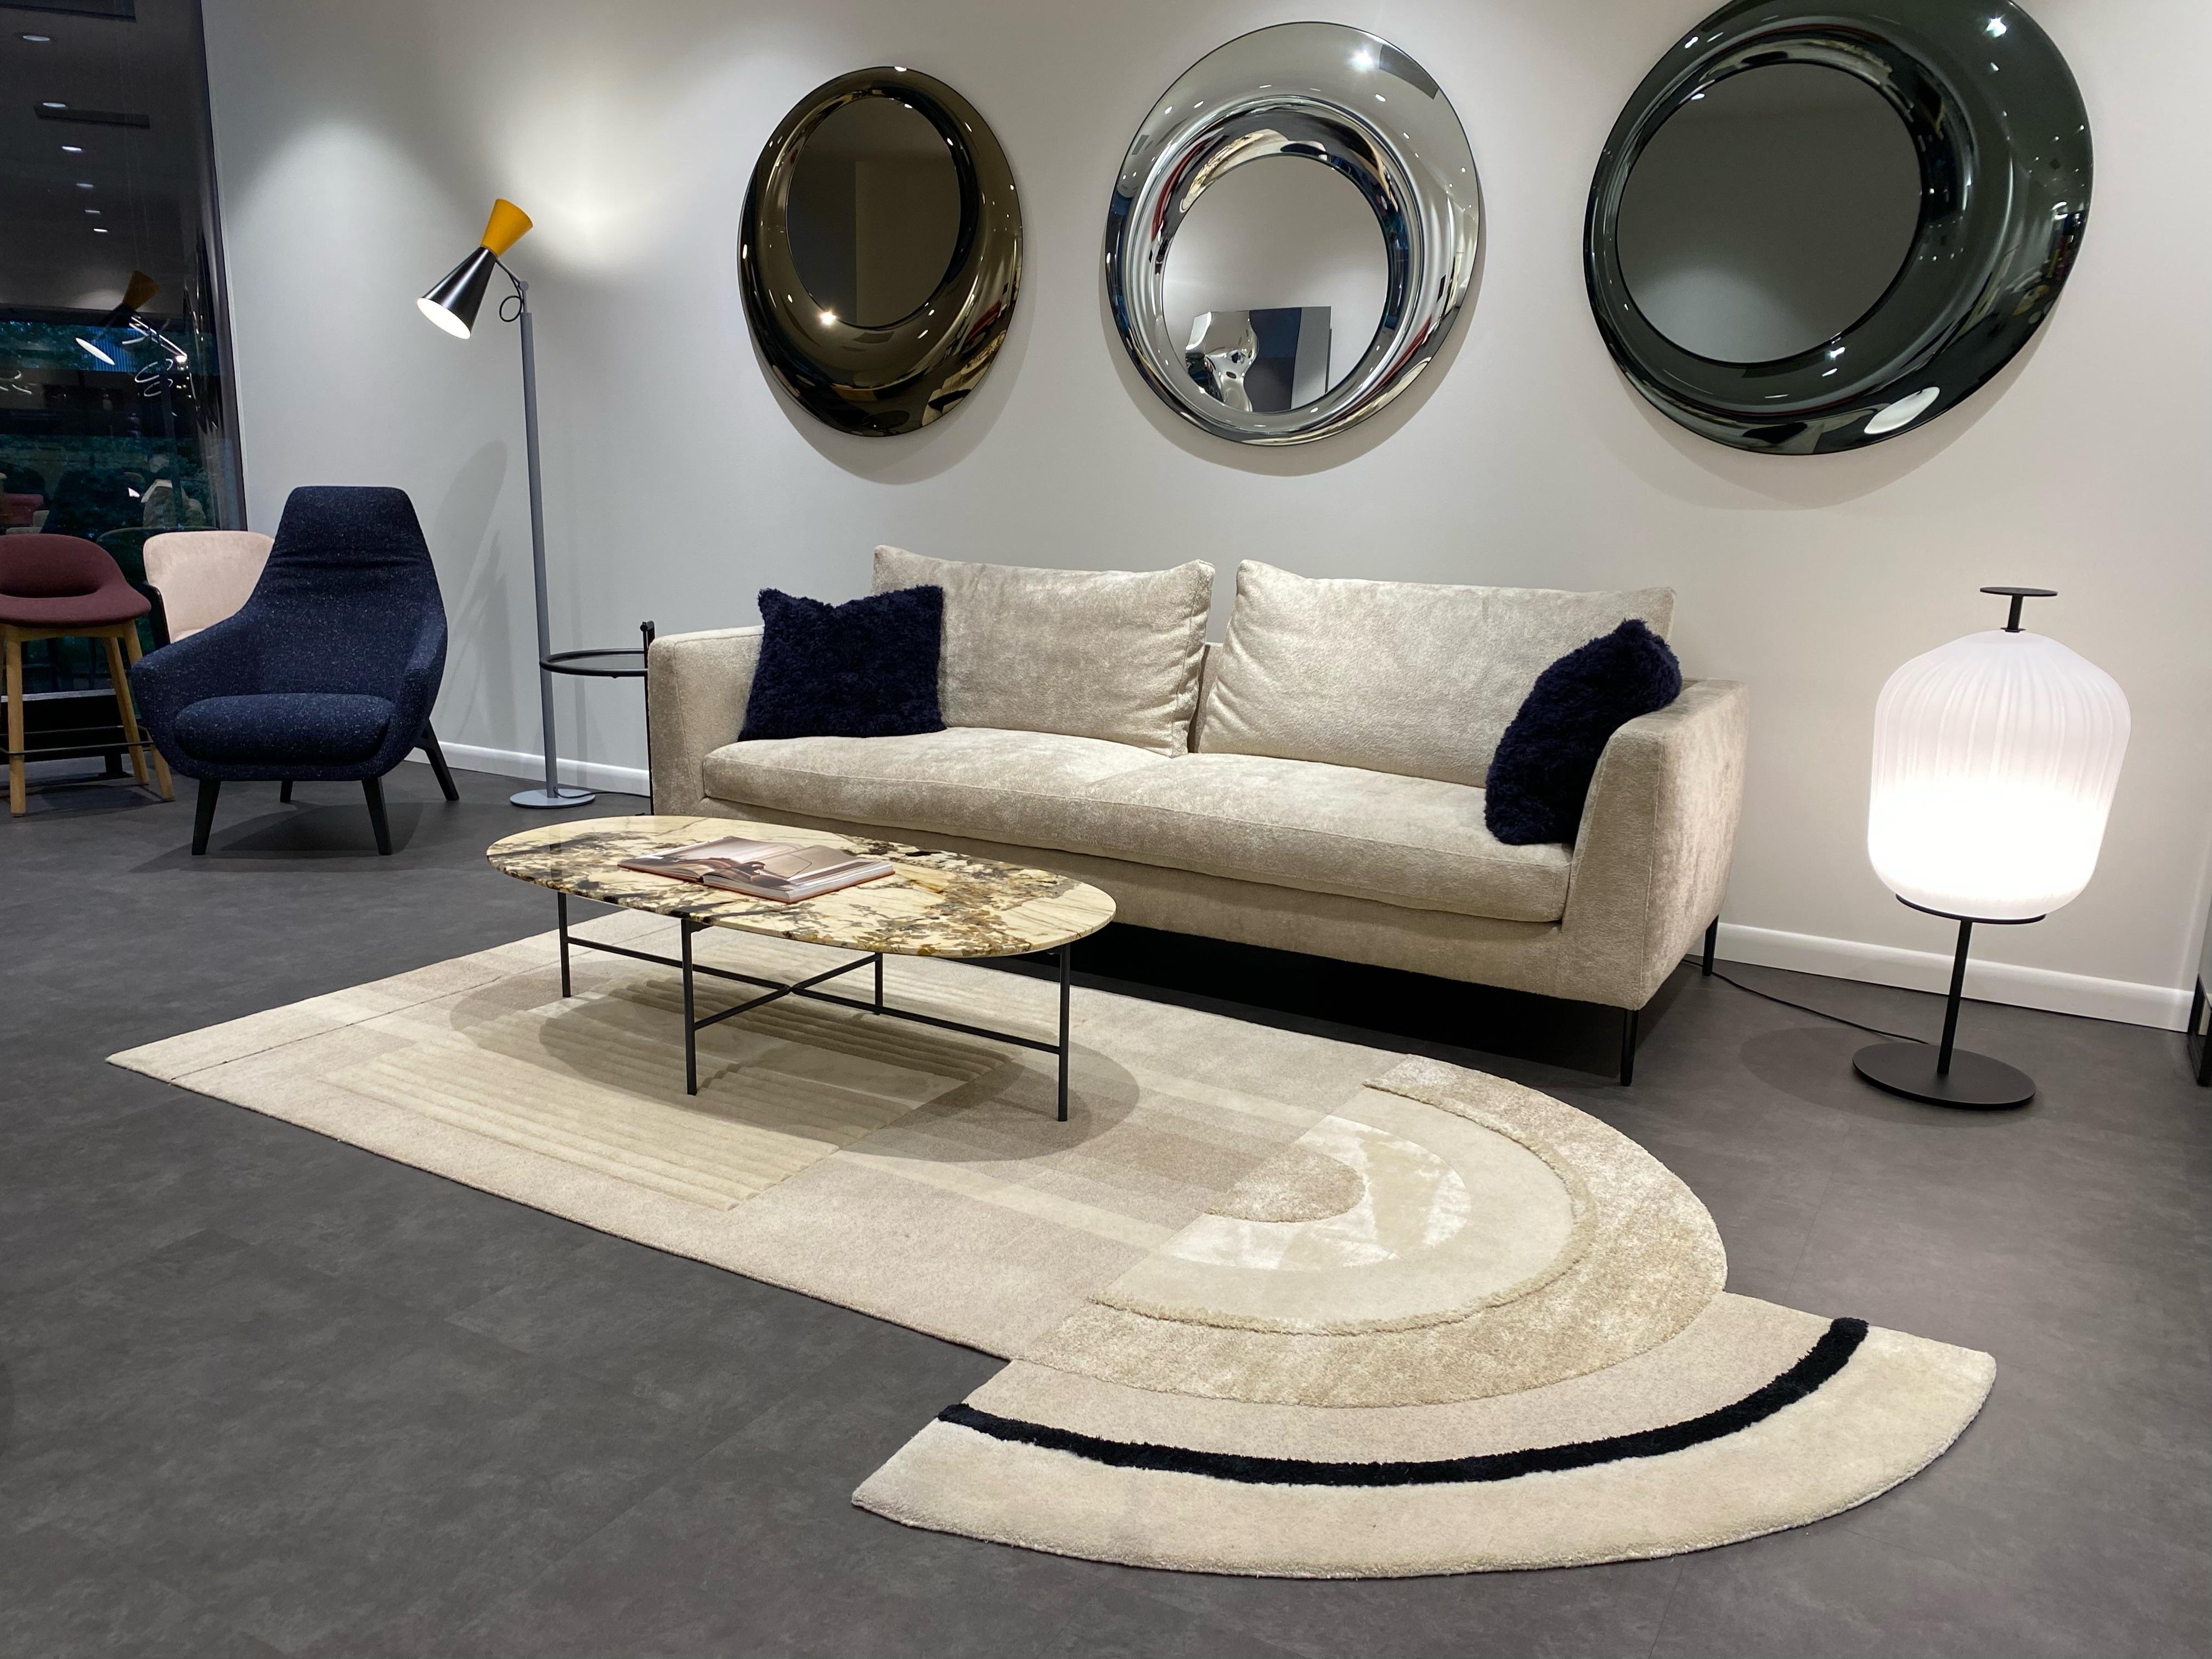 Bliss Big Ultimate Undyed.
Inspired by a sample that Mae Engelgeer created when she was experimenting with rounded shapes and curves, Bliss is a collection which brings a sculptural and three-dimensional effect to the surface of a rug. By mixing